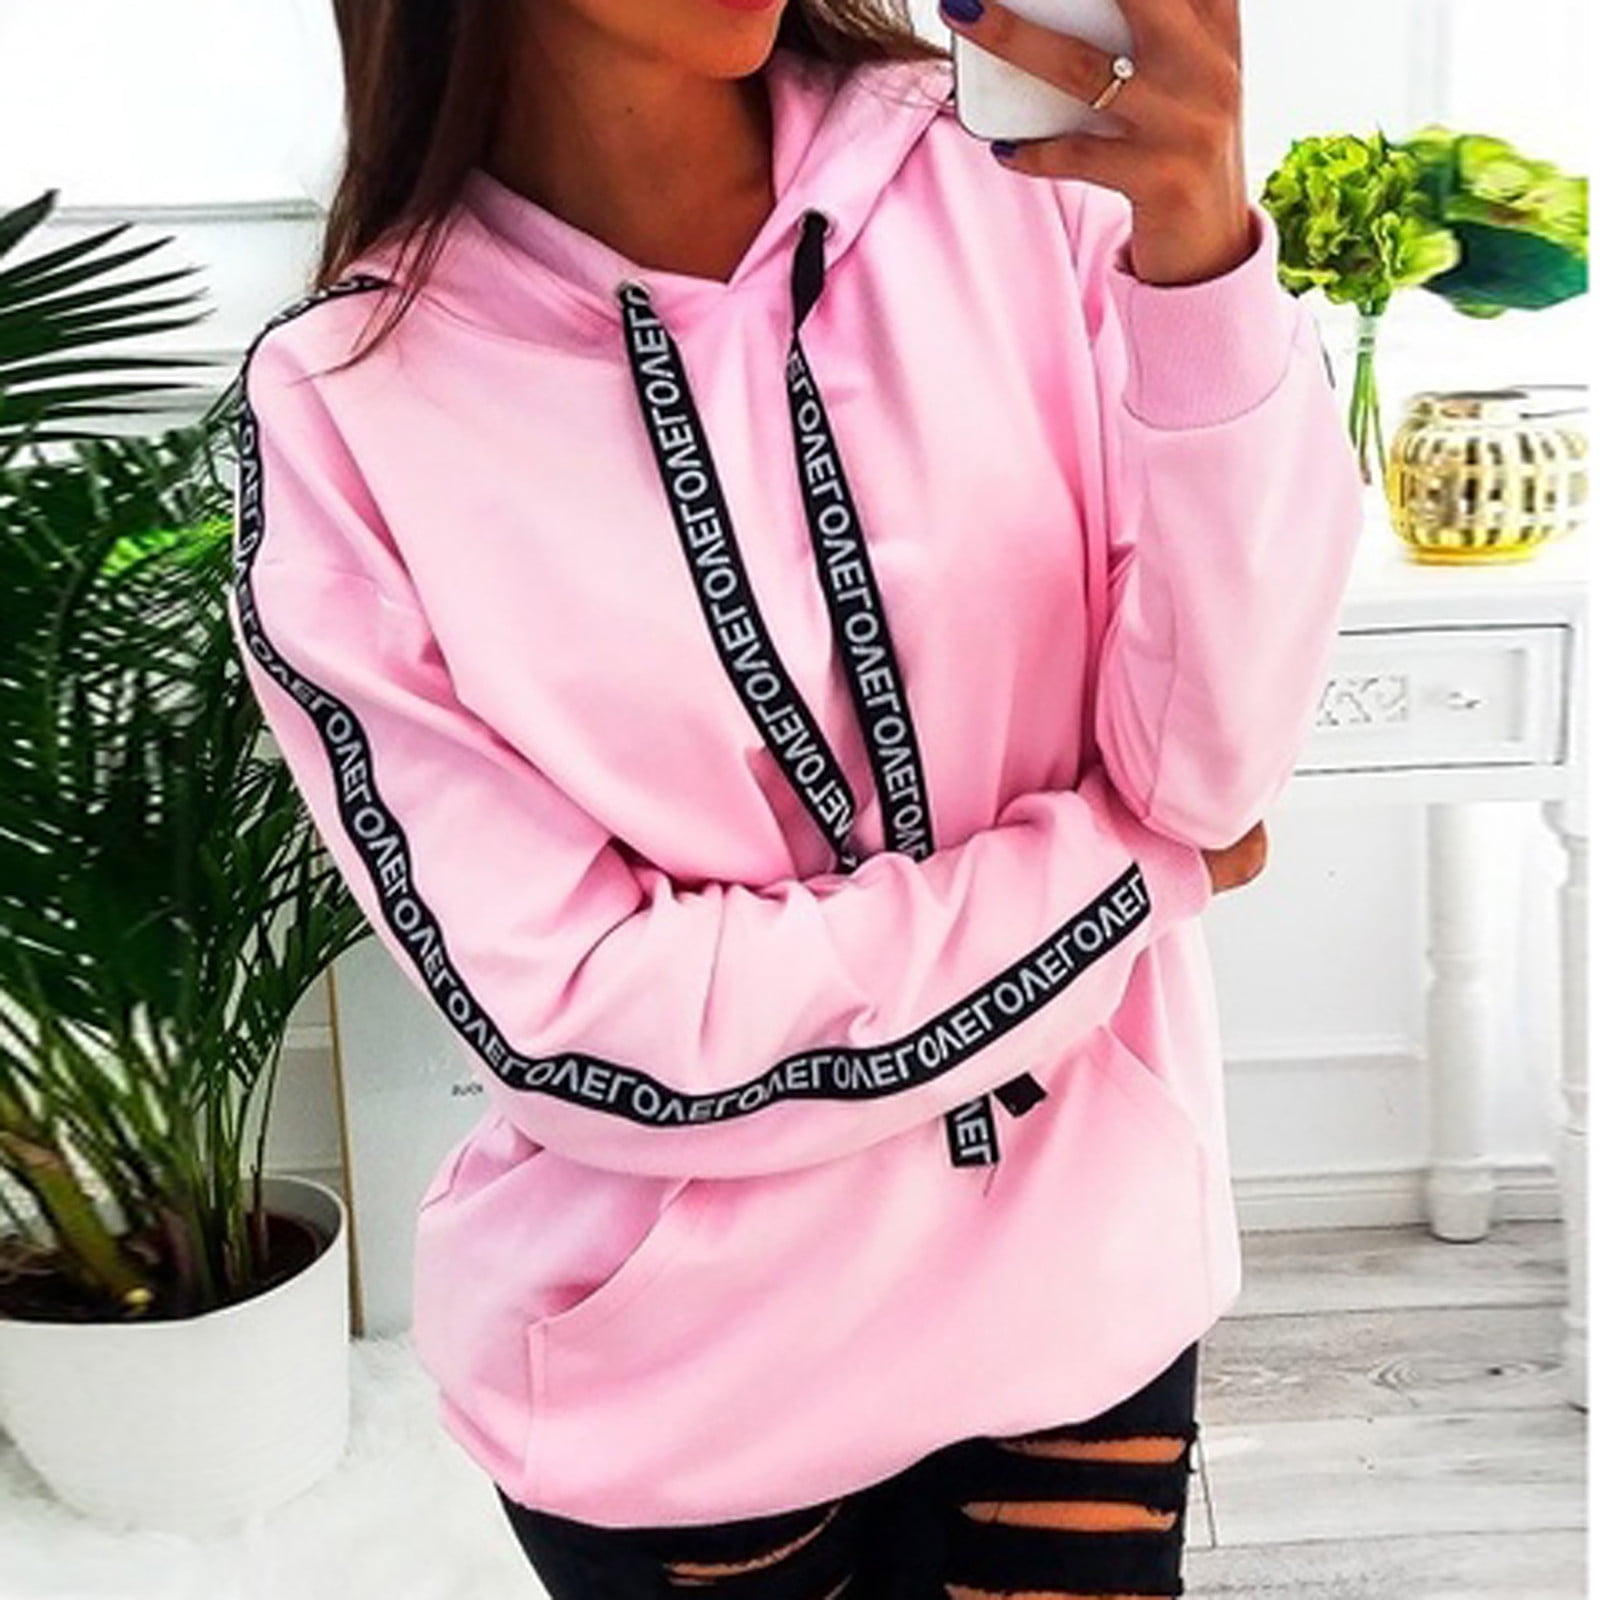 Fall Women Plus Size Long Sleeve Solid Sweatshirt Hooded Pullover Tops Shirt 